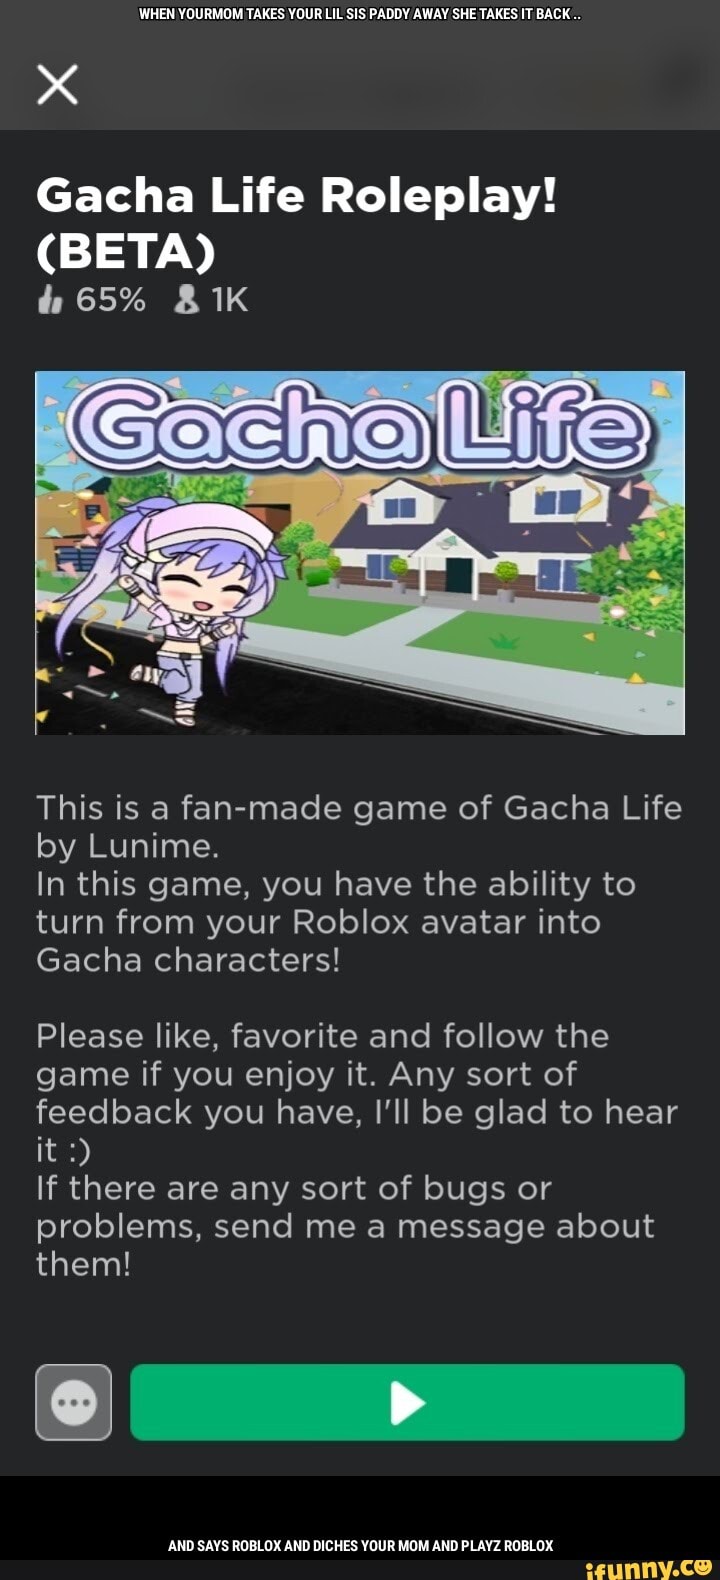 When Yourmom Takes Your Lil Sis Paddy Away She Takes It Back Gacha Life Roleplay Beta 465 This Is A Fan Made Game Of Gacha Life By Lunime In This Game You Have - roblox sort